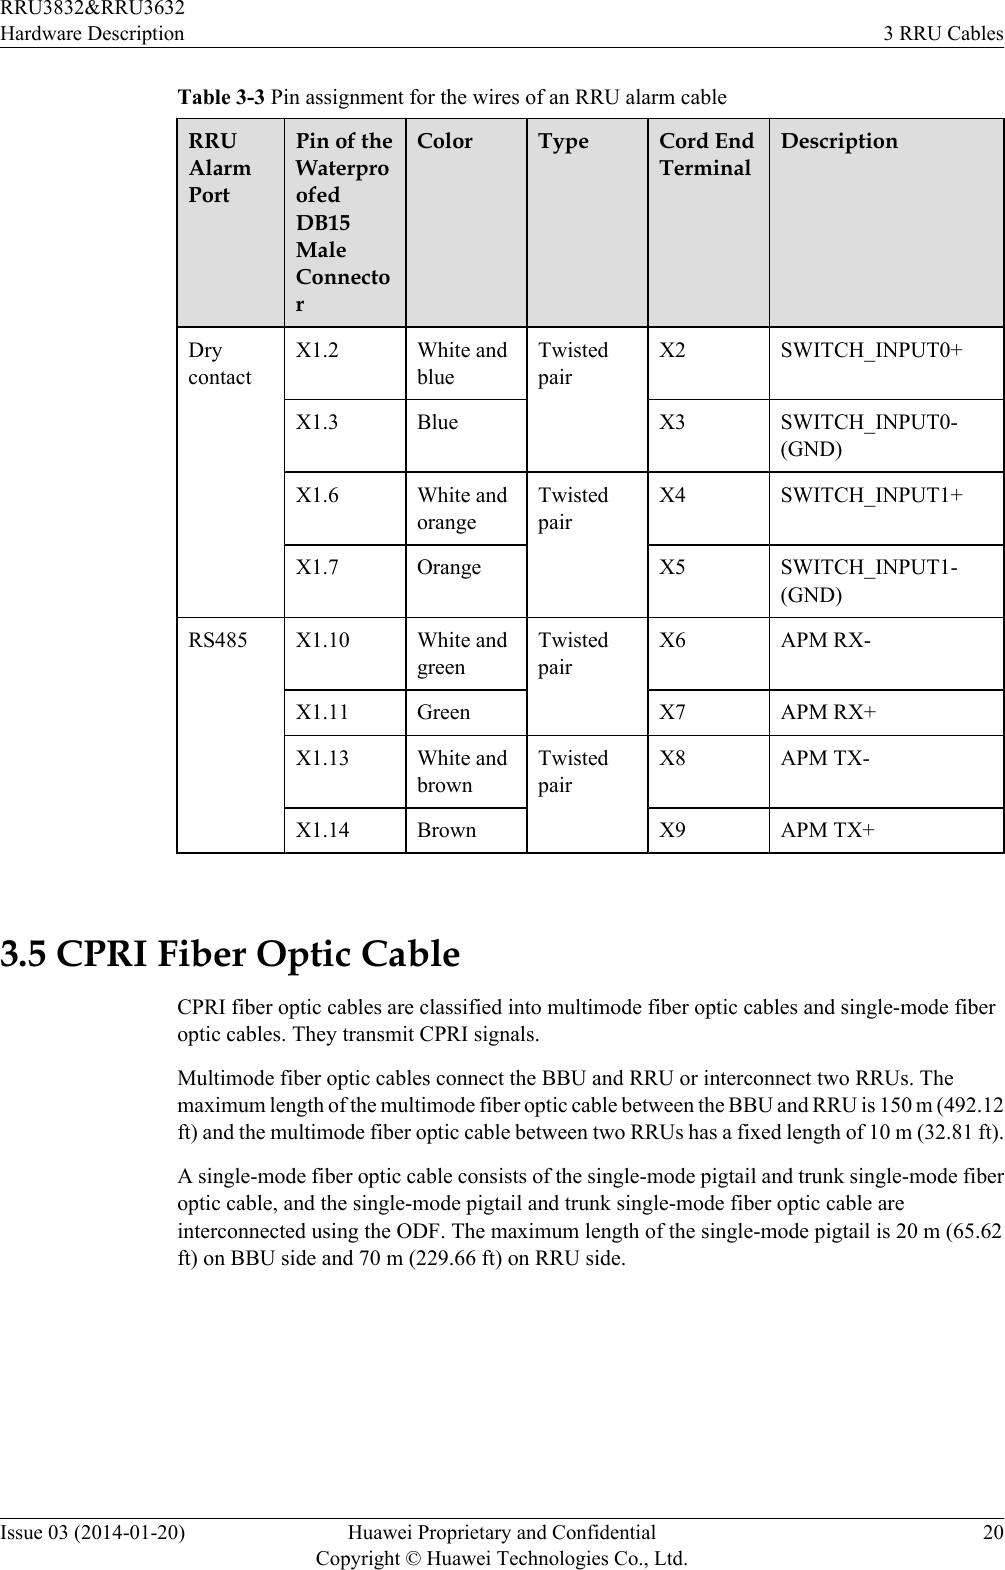 Table 3-3 Pin assignment for the wires of an RRU alarm cableRRUAlarmPortPin of theWaterproofedDB15MaleConnectorColor Type Cord EndTerminalDescriptionDrycontactX1.2 White andblueTwistedpairX2 SWITCH_INPUT0+X1.3 Blue X3 SWITCH_INPUT0-(GND)X1.6 White andorangeTwistedpairX4 SWITCH_INPUT1+X1.7 Orange X5 SWITCH_INPUT1-(GND)RS485 X1.10 White andgreenTwistedpairX6 APM RX-X1.11 Green X7 APM RX+X1.13 White andbrownTwistedpairX8 APM TX-X1.14 Brown X9 APM TX+ 3.5 CPRI Fiber Optic CableCPRI fiber optic cables are classified into multimode fiber optic cables and single-mode fiberoptic cables. They transmit CPRI signals.Multimode fiber optic cables connect the BBU and RRU or interconnect two RRUs. Themaximum length of the multimode fiber optic cable between the BBU and RRU is 150 m (492.12ft) and the multimode fiber optic cable between two RRUs has a fixed length of 10 m (32.81 ft).A single-mode fiber optic cable consists of the single-mode pigtail and trunk single-mode fiberoptic cable, and the single-mode pigtail and trunk single-mode fiber optic cable areinterconnected using the ODF. The maximum length of the single-mode pigtail is 20 m (65.62ft) on BBU side and 70 m (229.66 ft) on RRU side.RRU3832&amp;RRU3632Hardware Description 3 RRU CablesIssue 03 (2014-01-20) Huawei Proprietary and ConfidentialCopyright © Huawei Technologies Co., Ltd.20